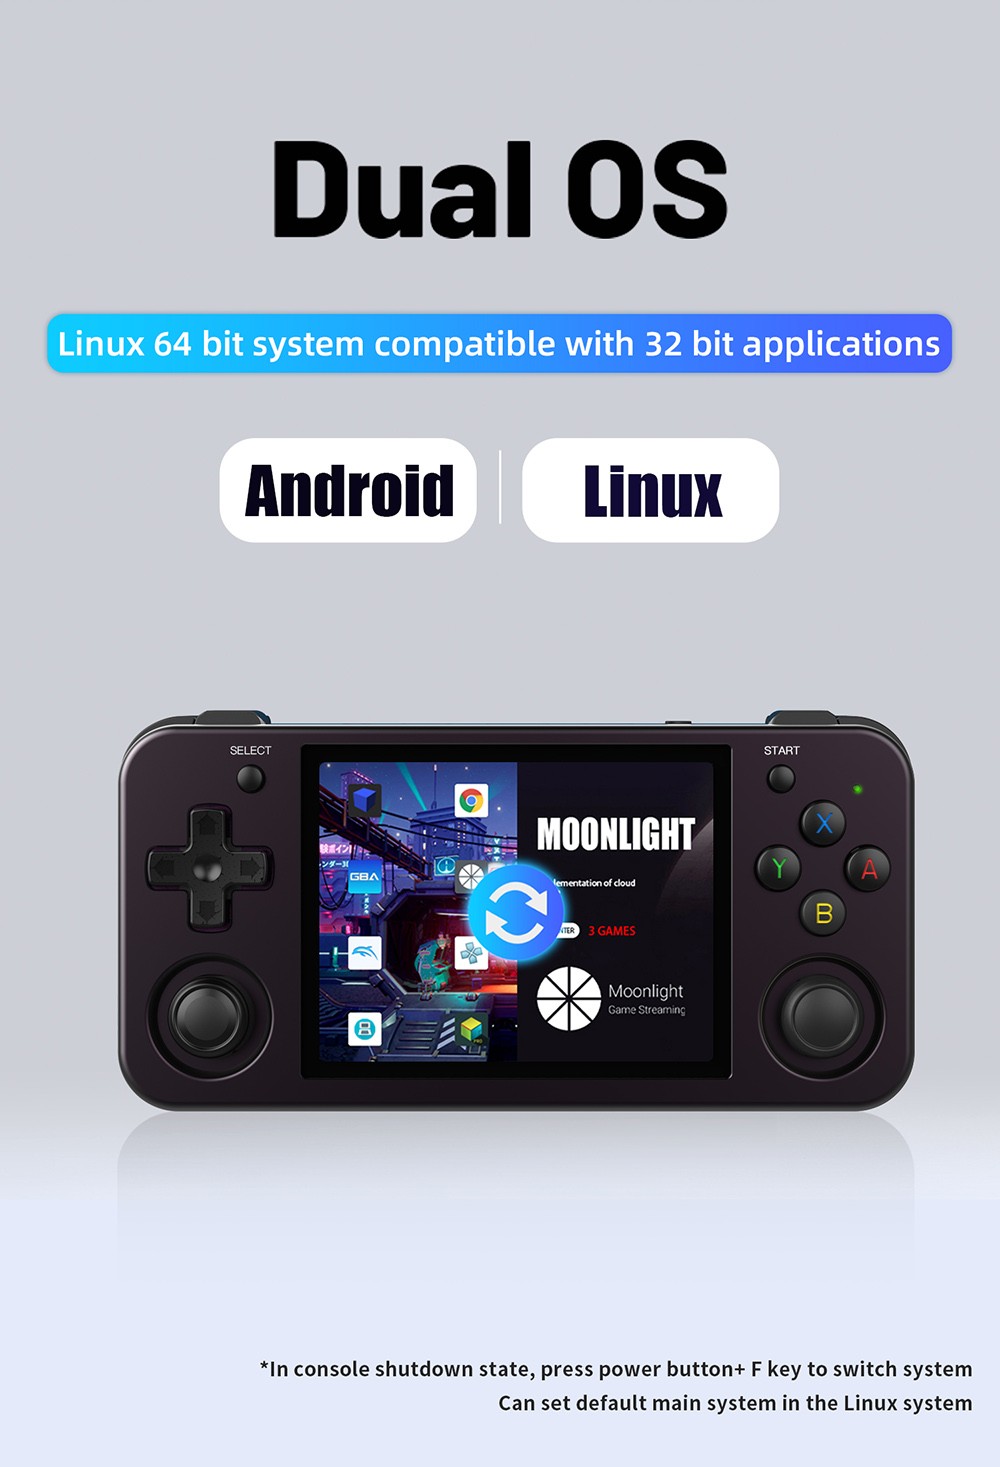 ANBERNIC RG353M Handheld Game Console, 3.5'' IPS Screen Android 32GB high-speed eMMC 5.1 Linux 16GB, 256GB TF Card - Purple